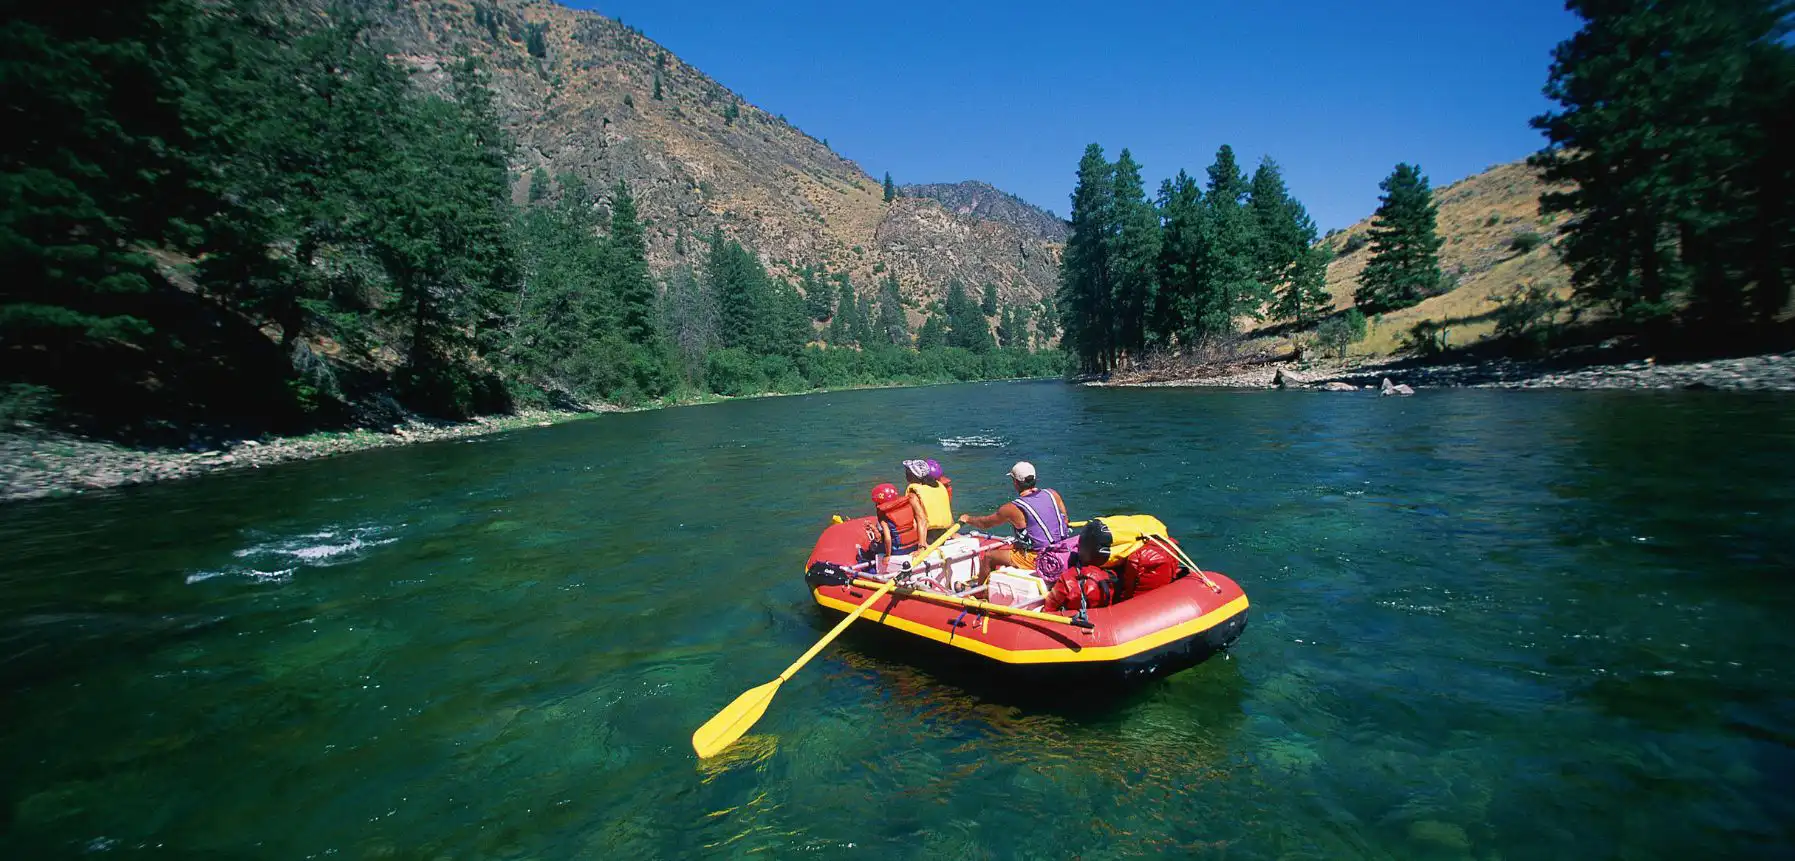  Get Energies with River Rafting